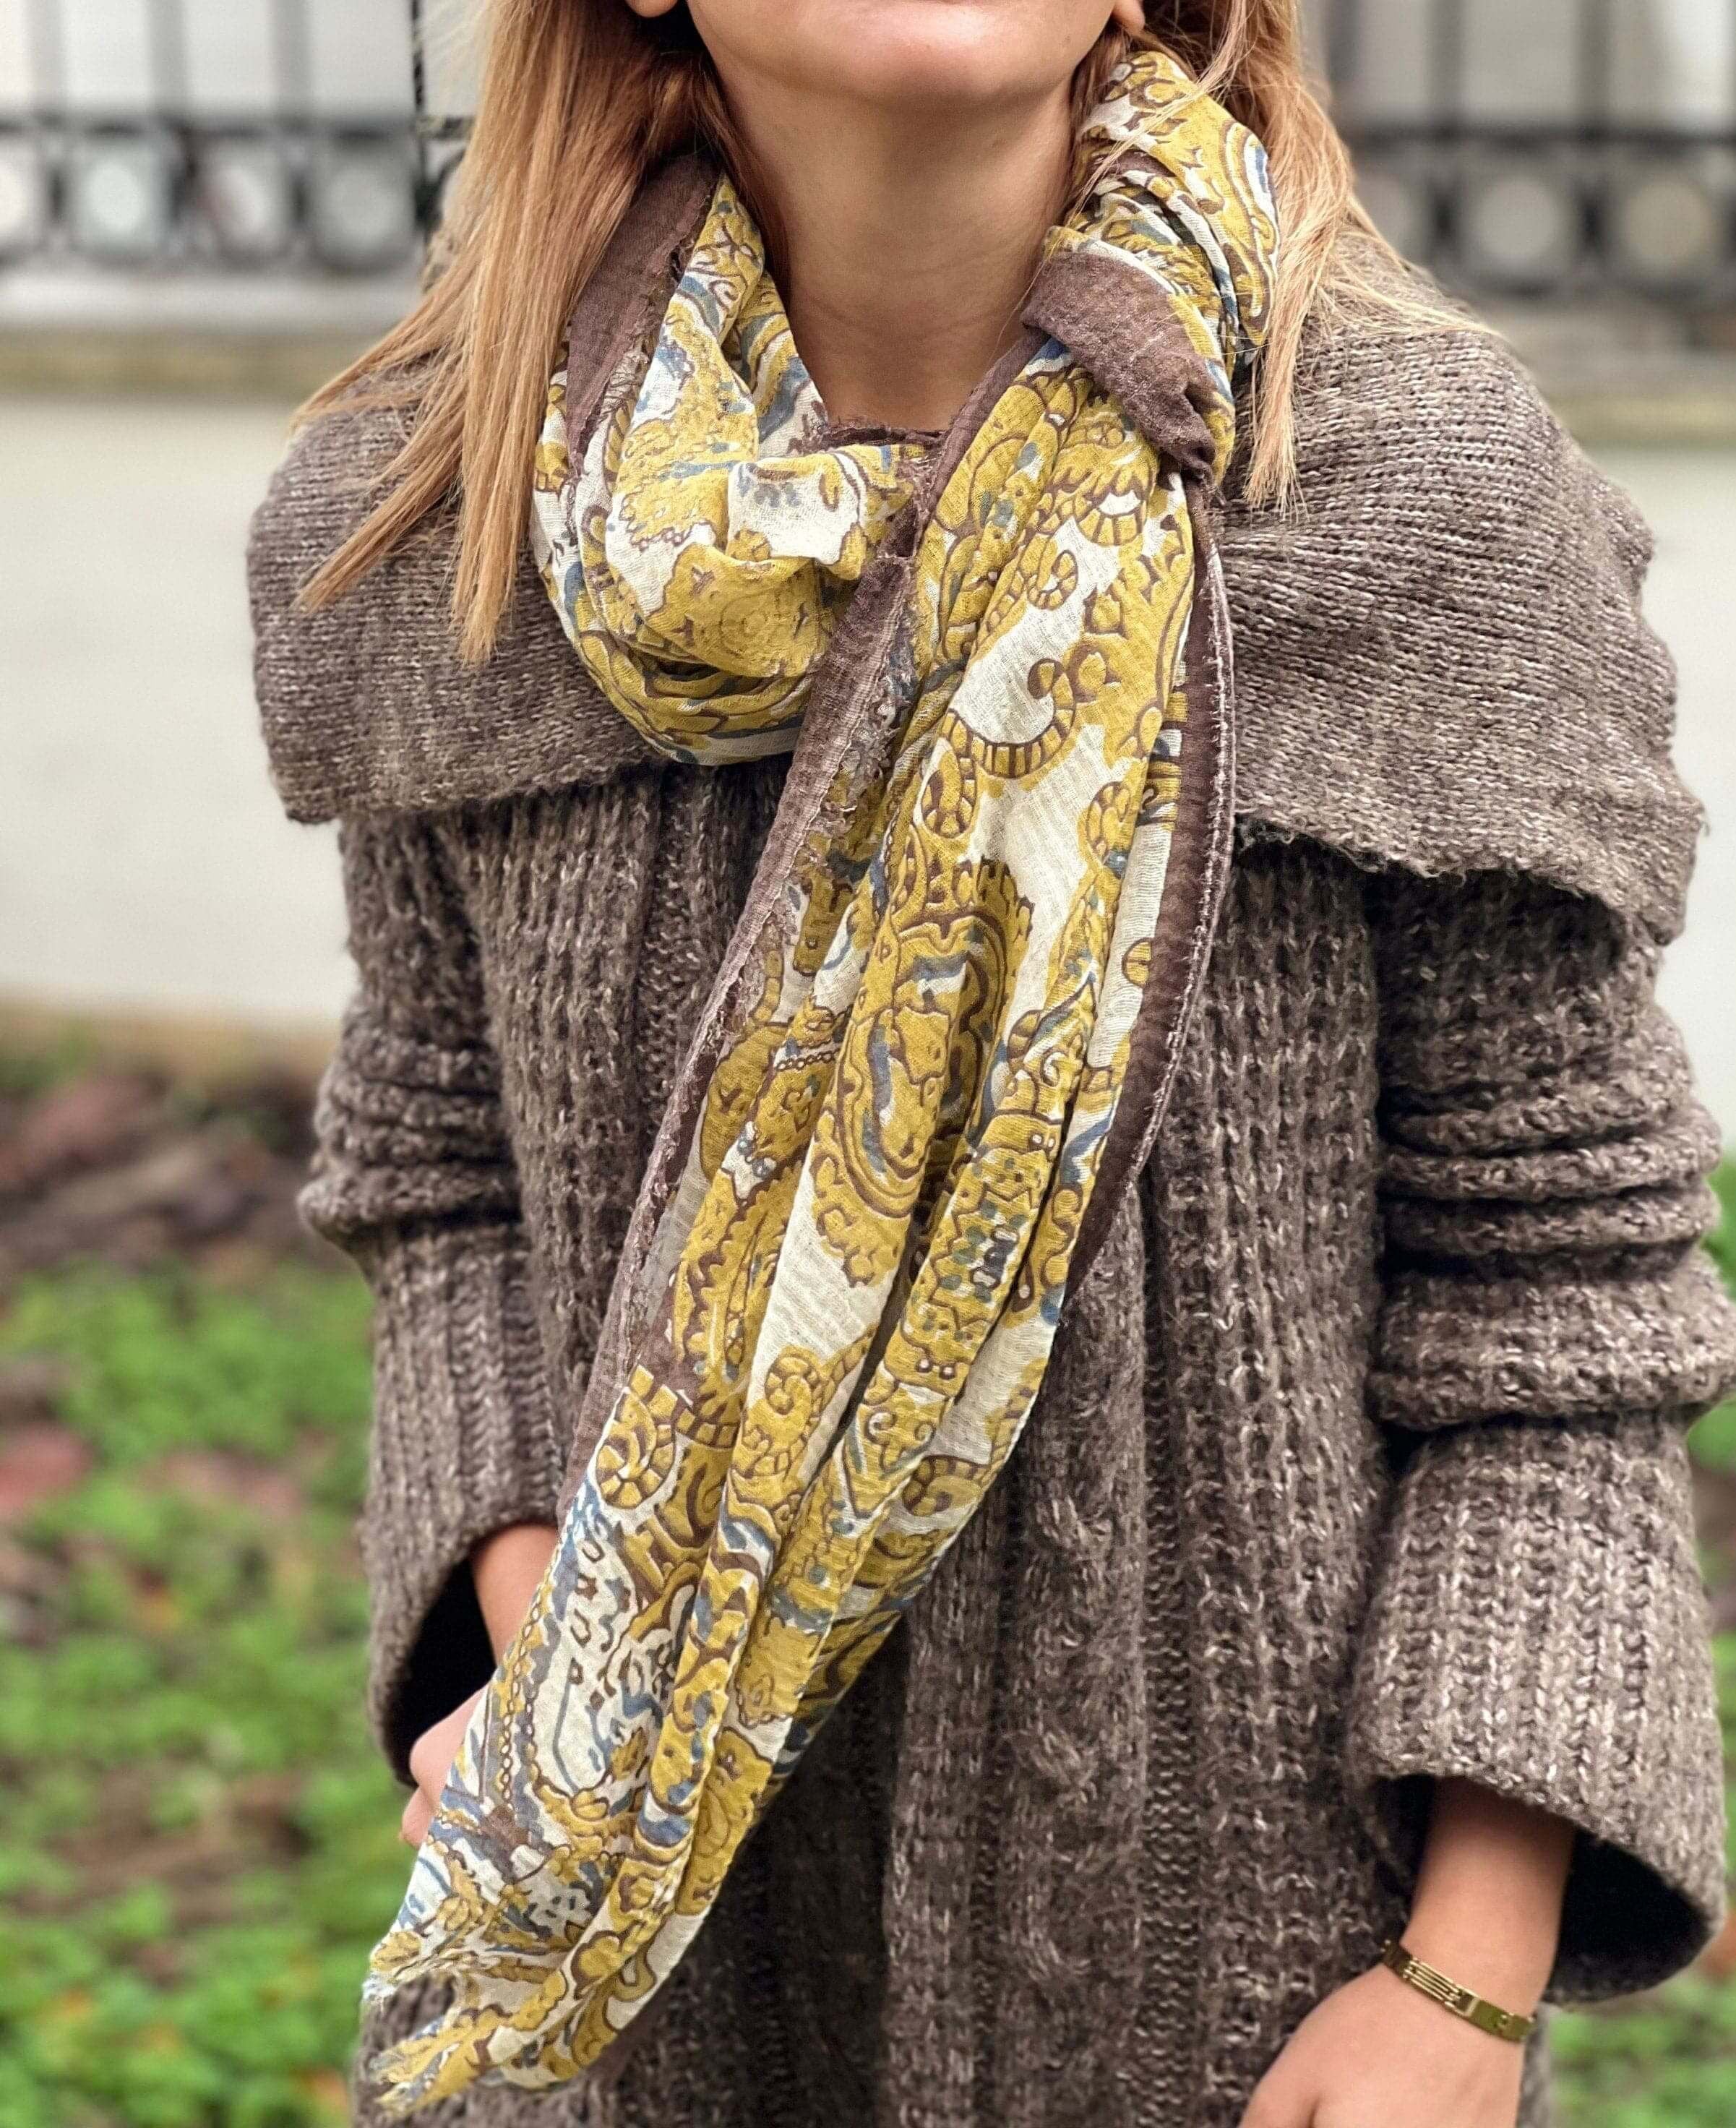 Need a Spring Summer Scarf but don&#39;t know where to start? Our collection features all the latest trends in printed scarves, from delicate flowers to bold graphics. Find the perfect design for you and layer it up for some extra warmth this season.